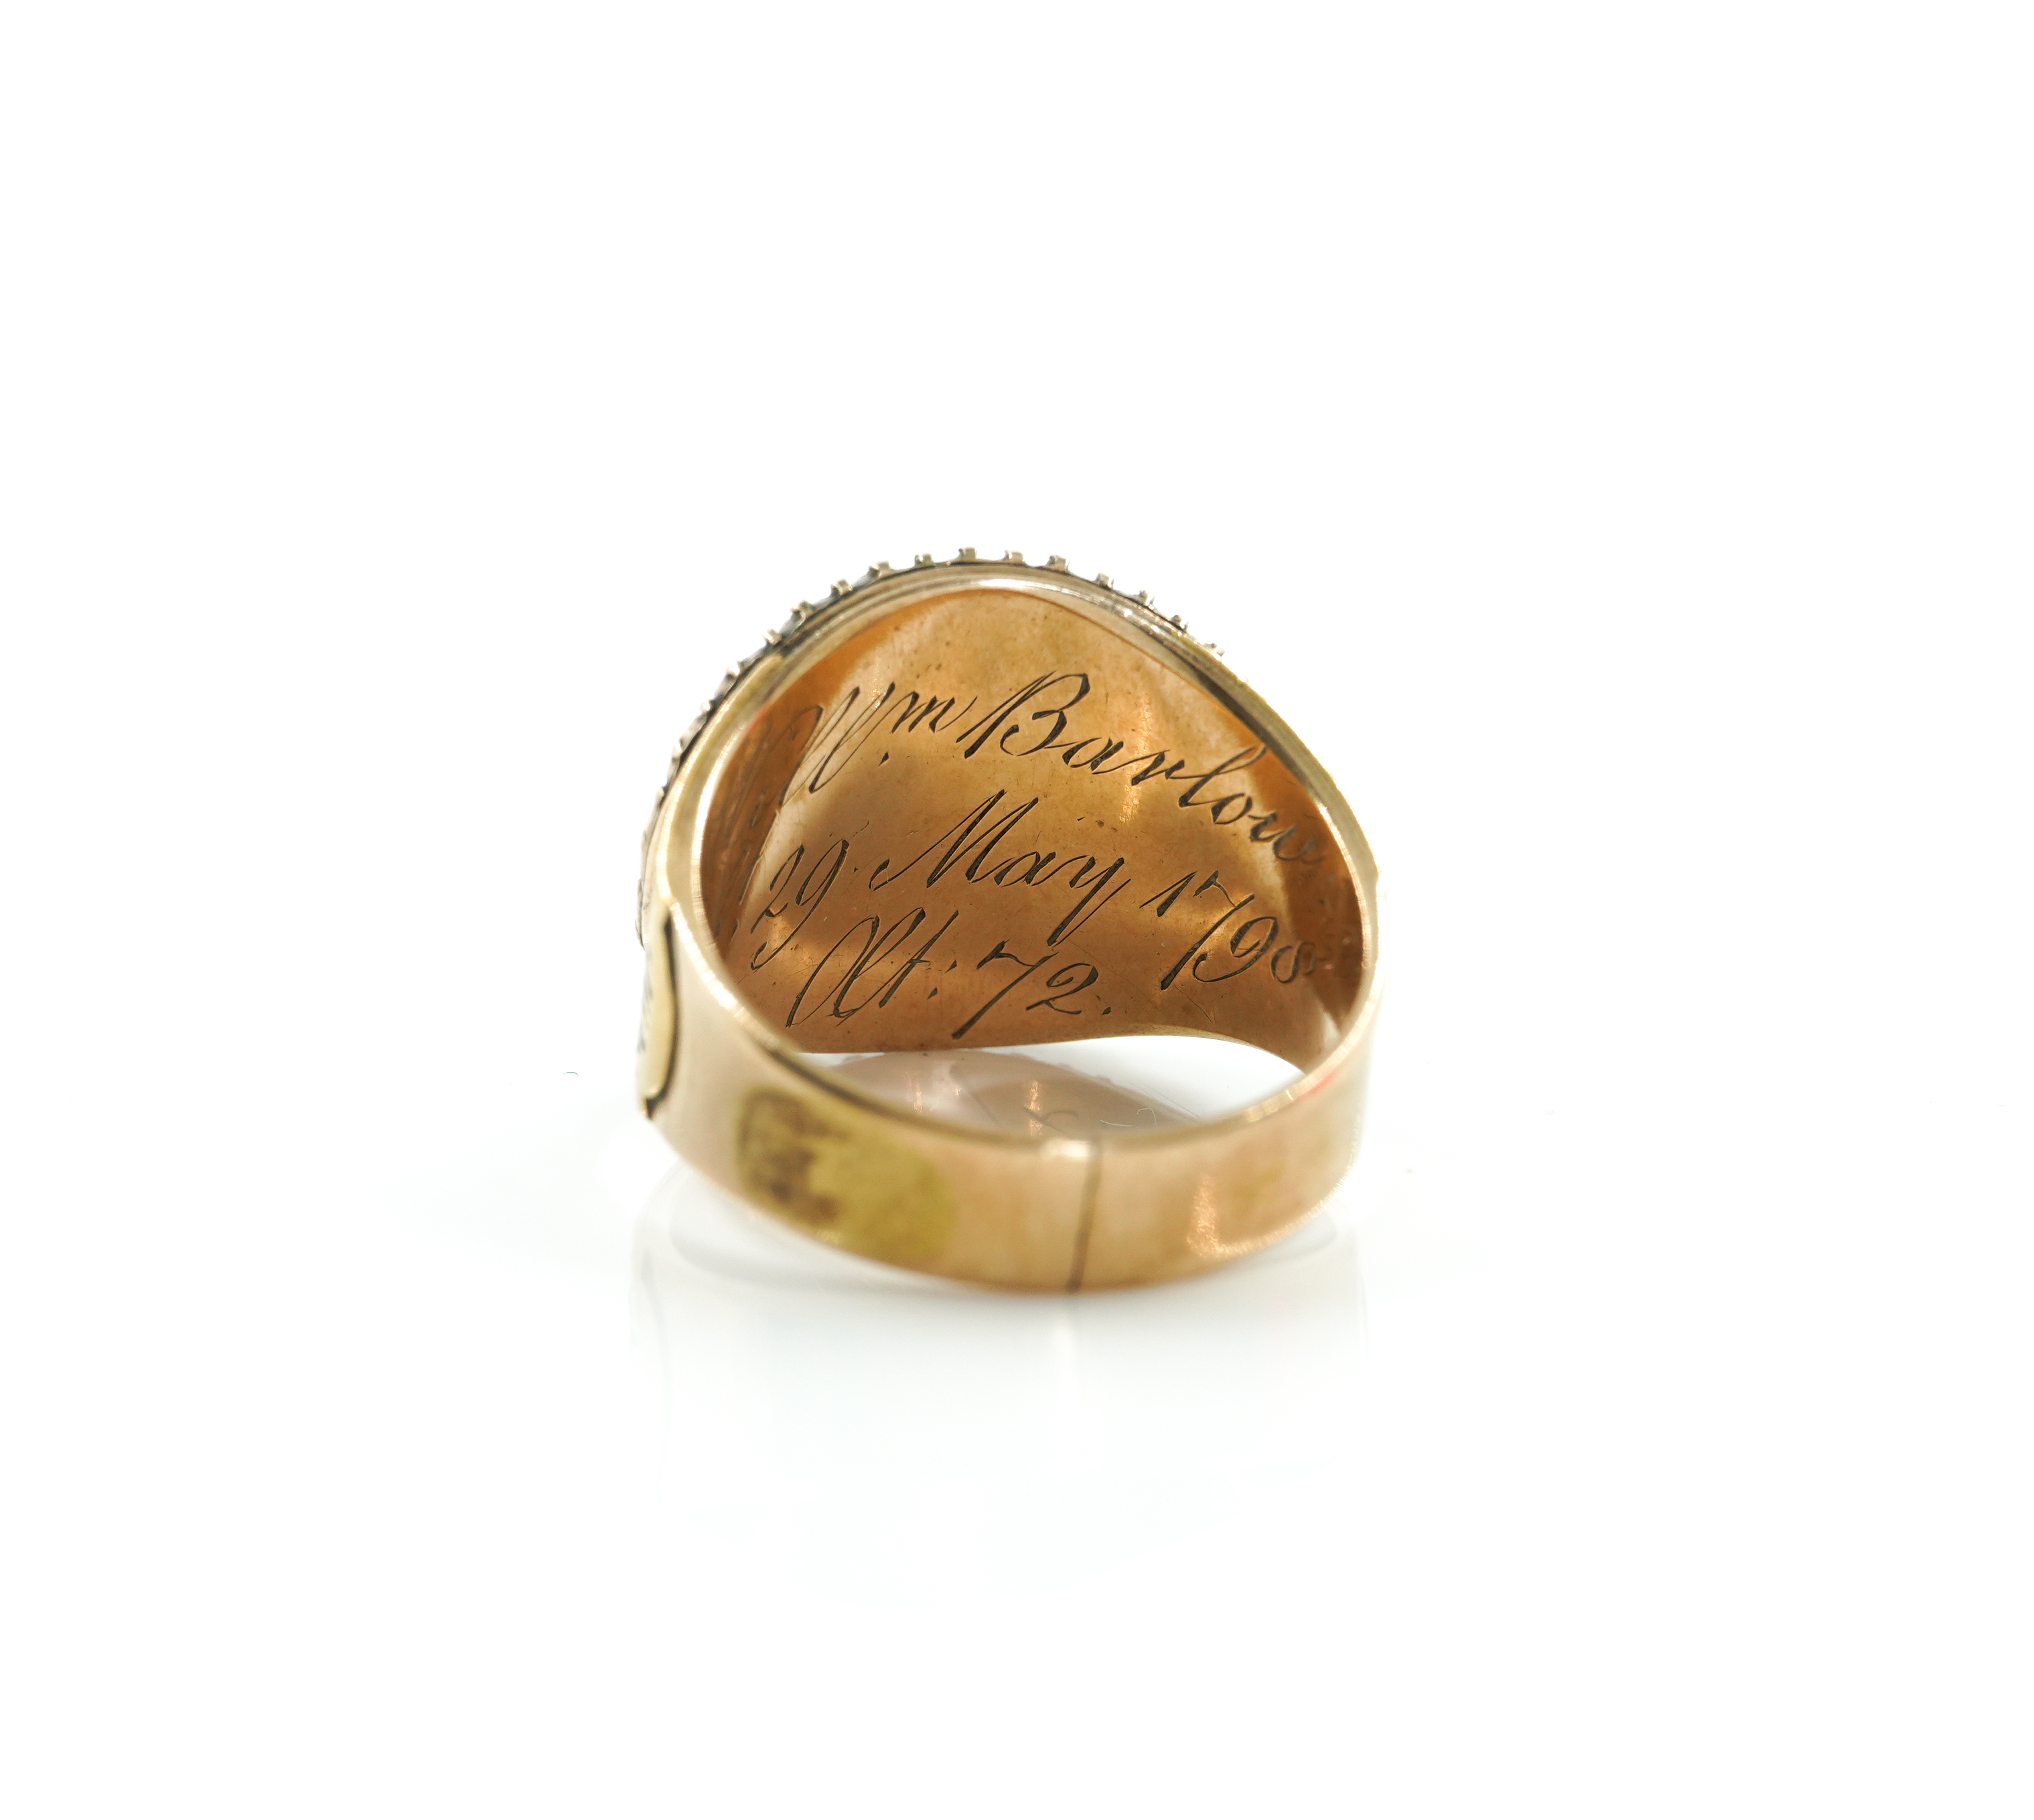 A LATE 18TH CENTURY GOLD, ENAMELLED AND HALF PEARL SET MOURNING RING - Image 3 of 4